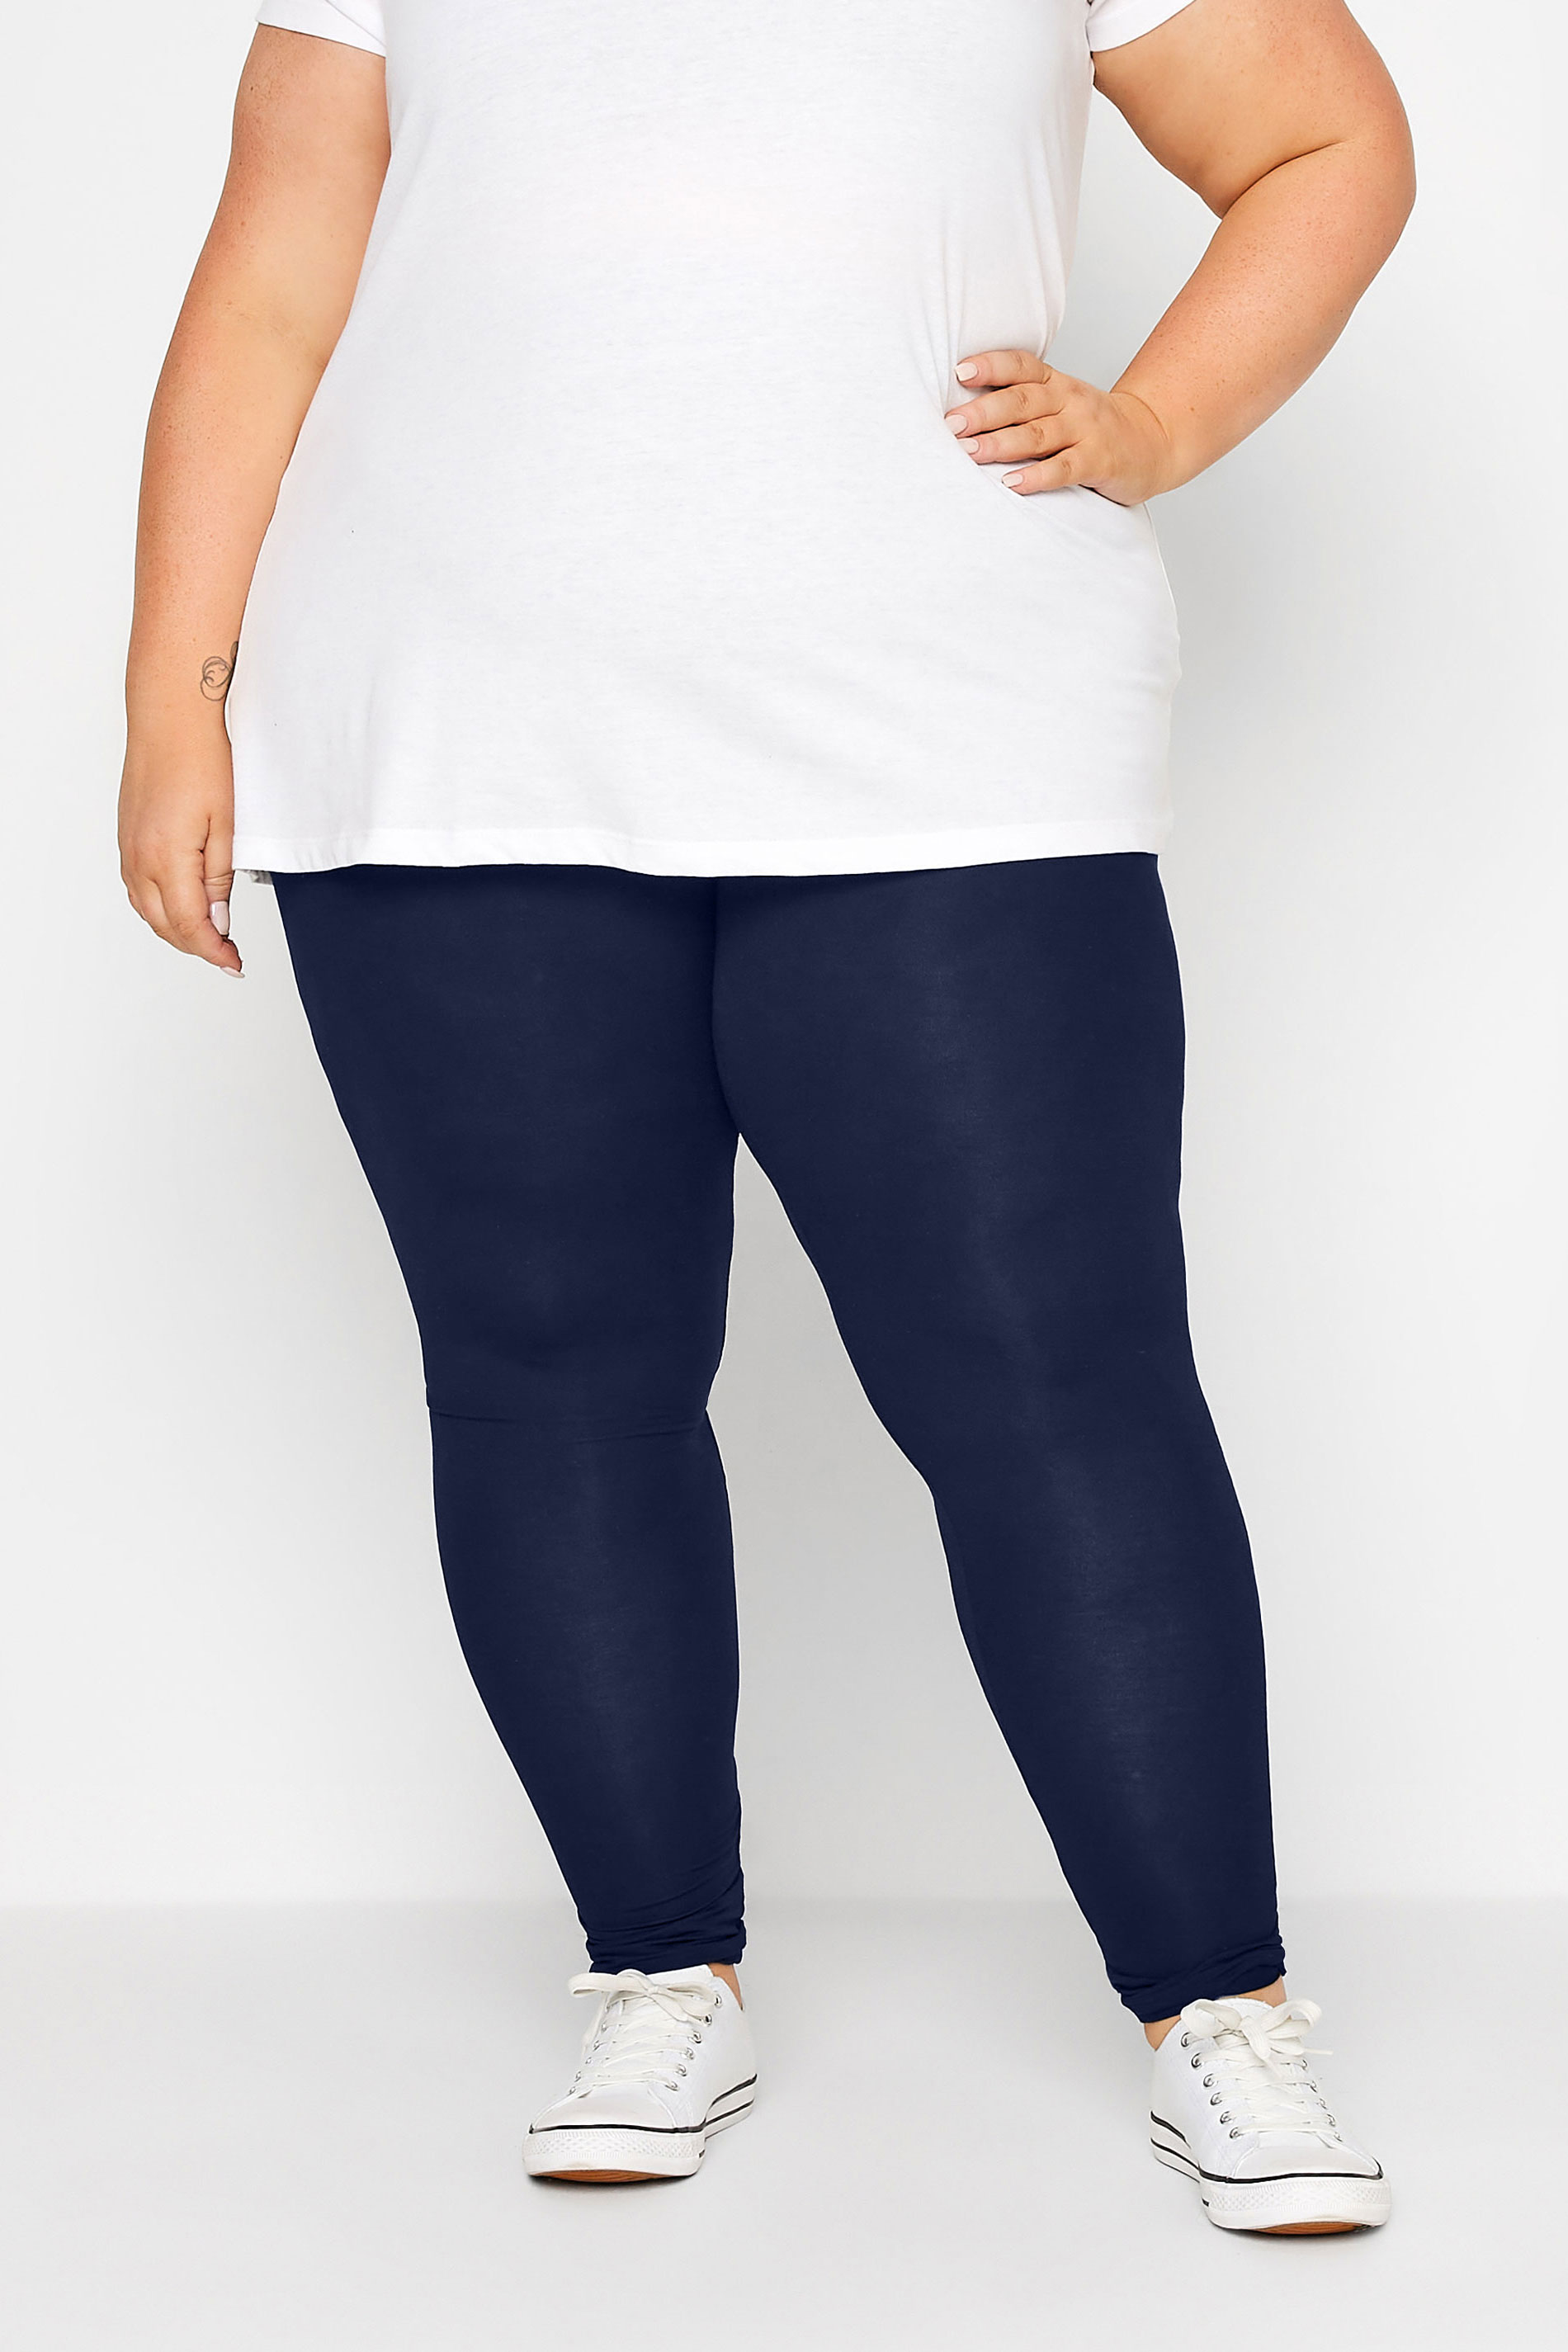 YOURS Curve Navy Blue Soft Touch Stretch Leggings